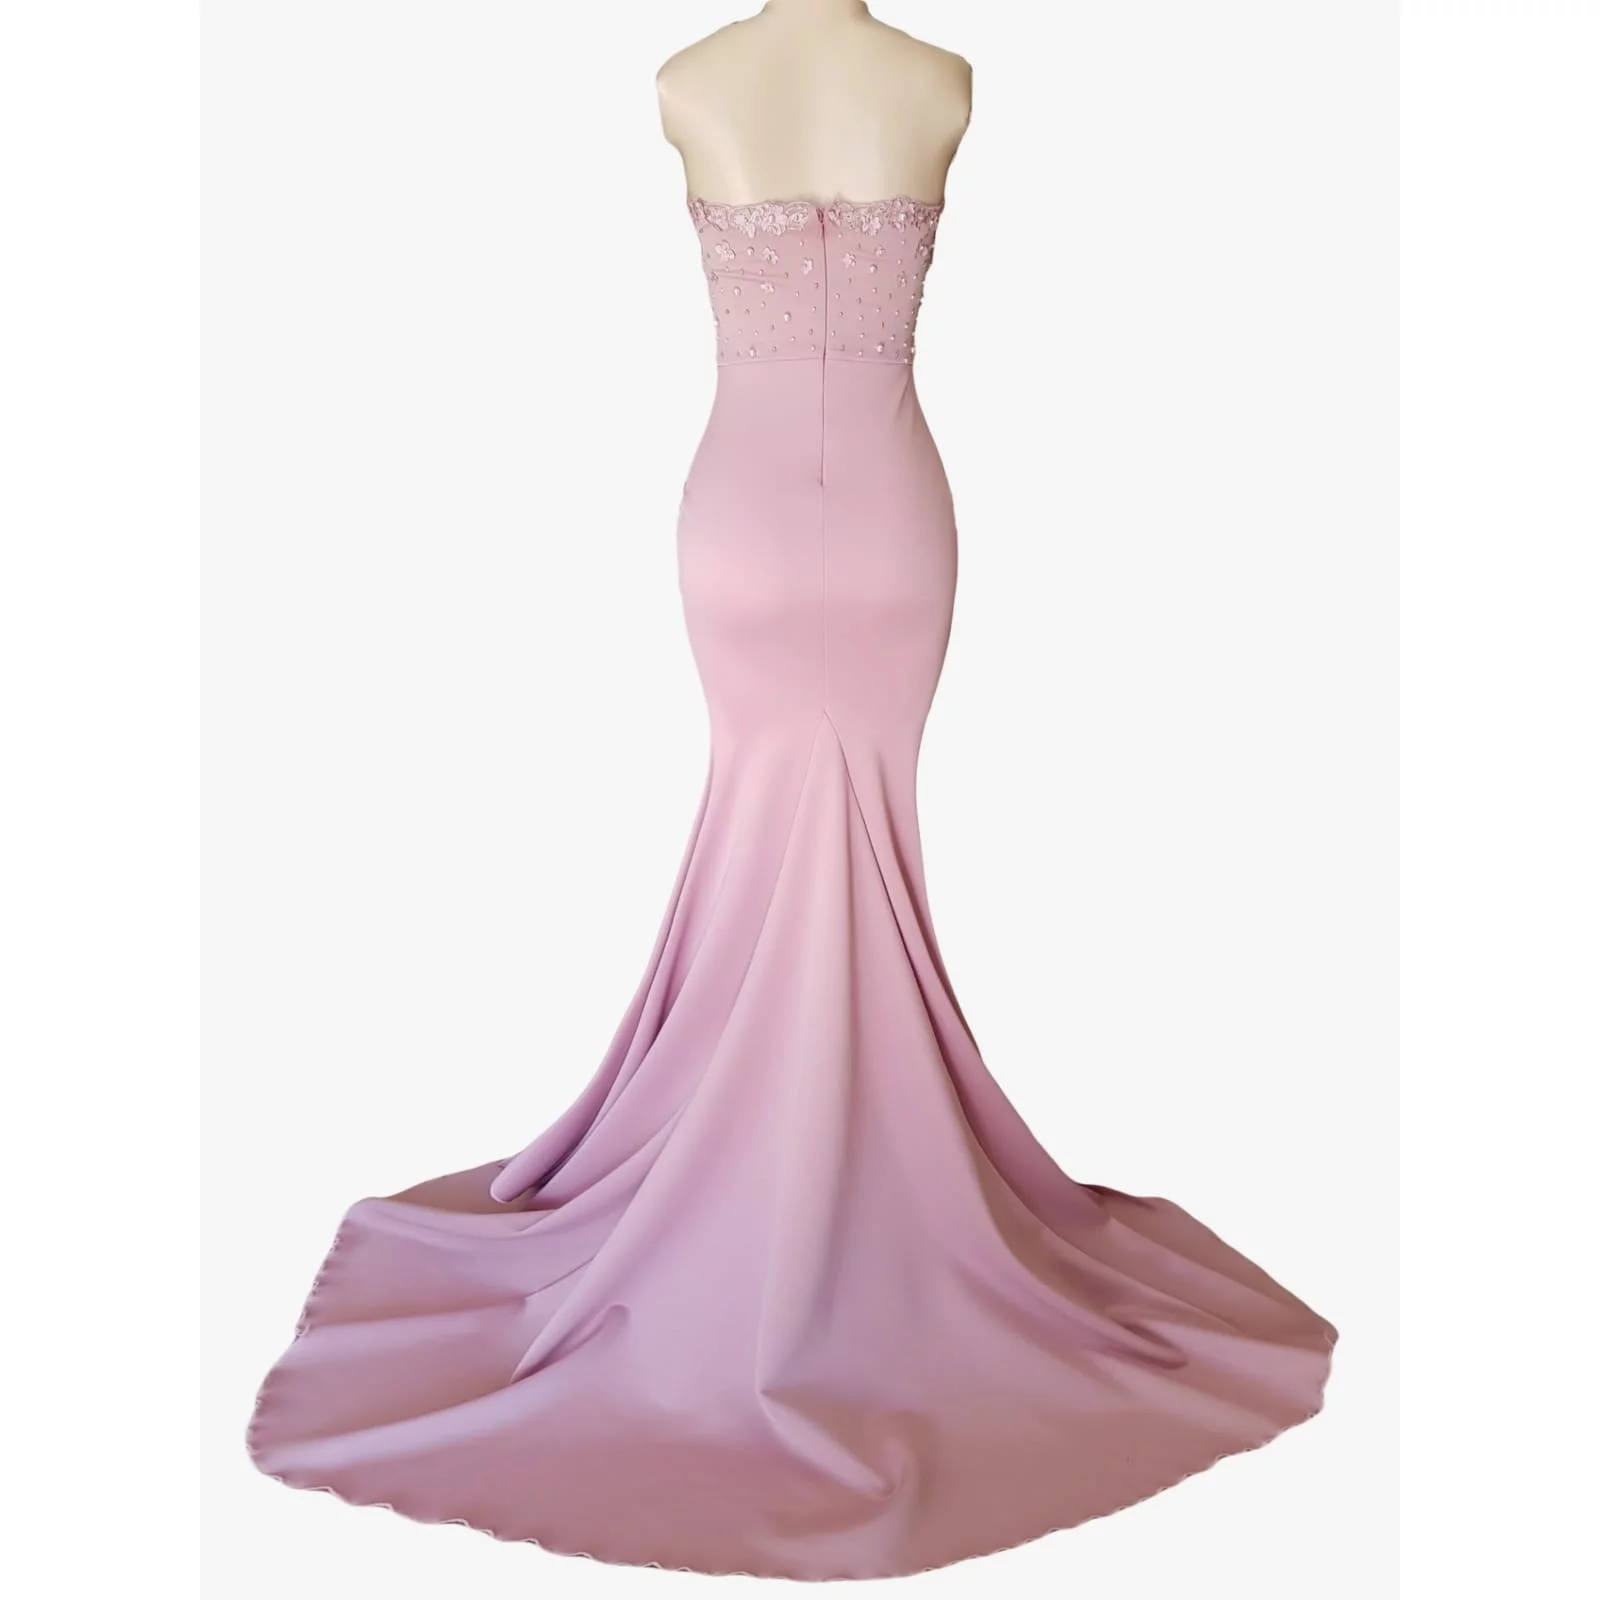 Pale pink soft mermaid prom dress 4 pale pink soft mermaid prom dress, bodice detailed with pearls and 3d lace, with a train and detachable neck strap.